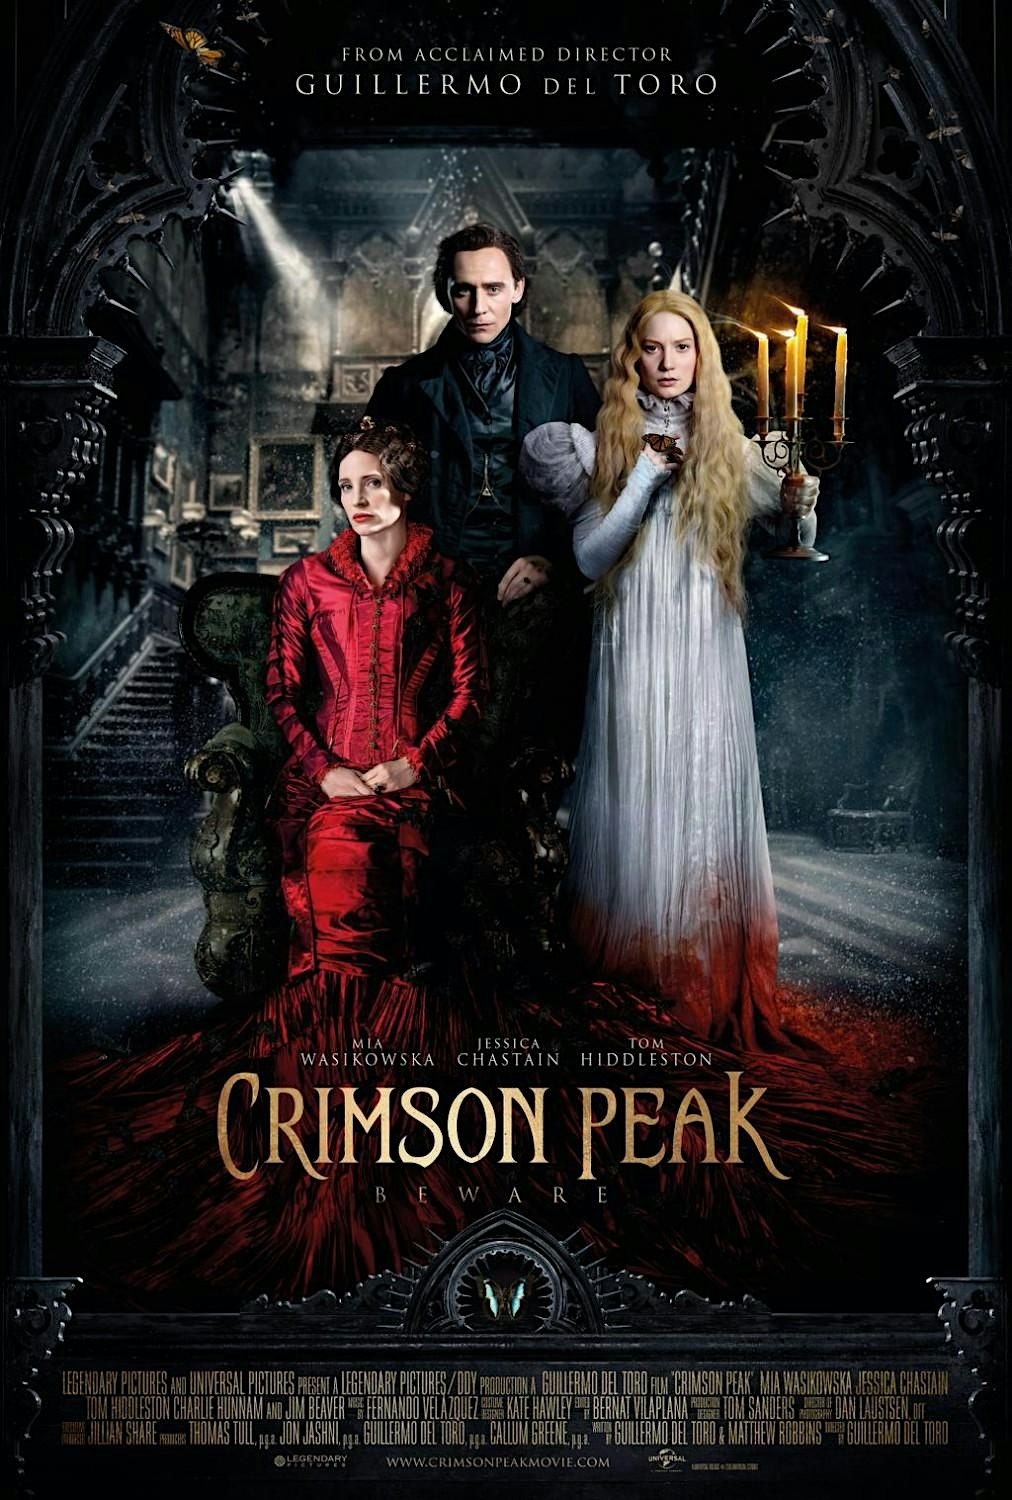 Ghosts are Real...Ghost Tours and Crimson Peak